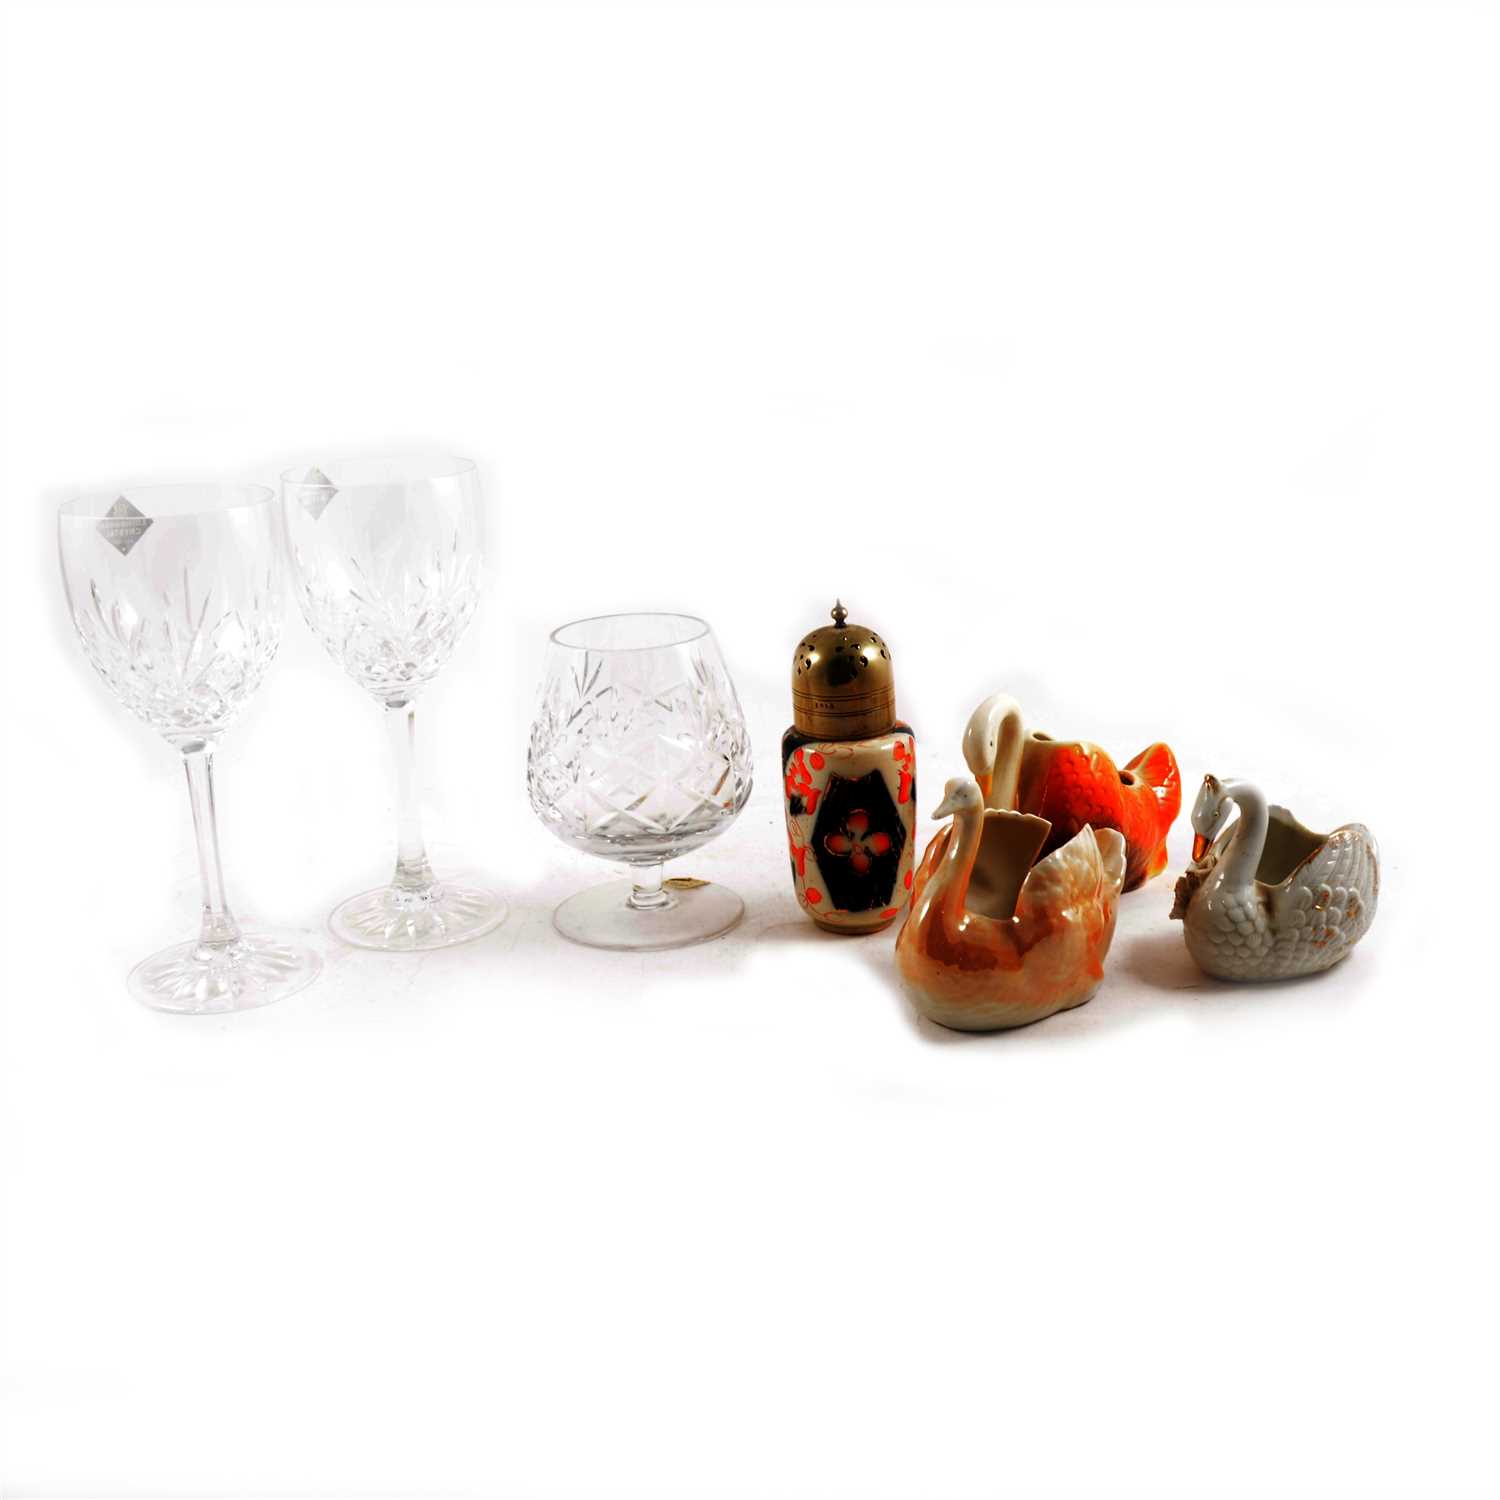 Lot 38 - A collection of glass and ceramics, to include six Edinburgh crystal wine goblets and model swans